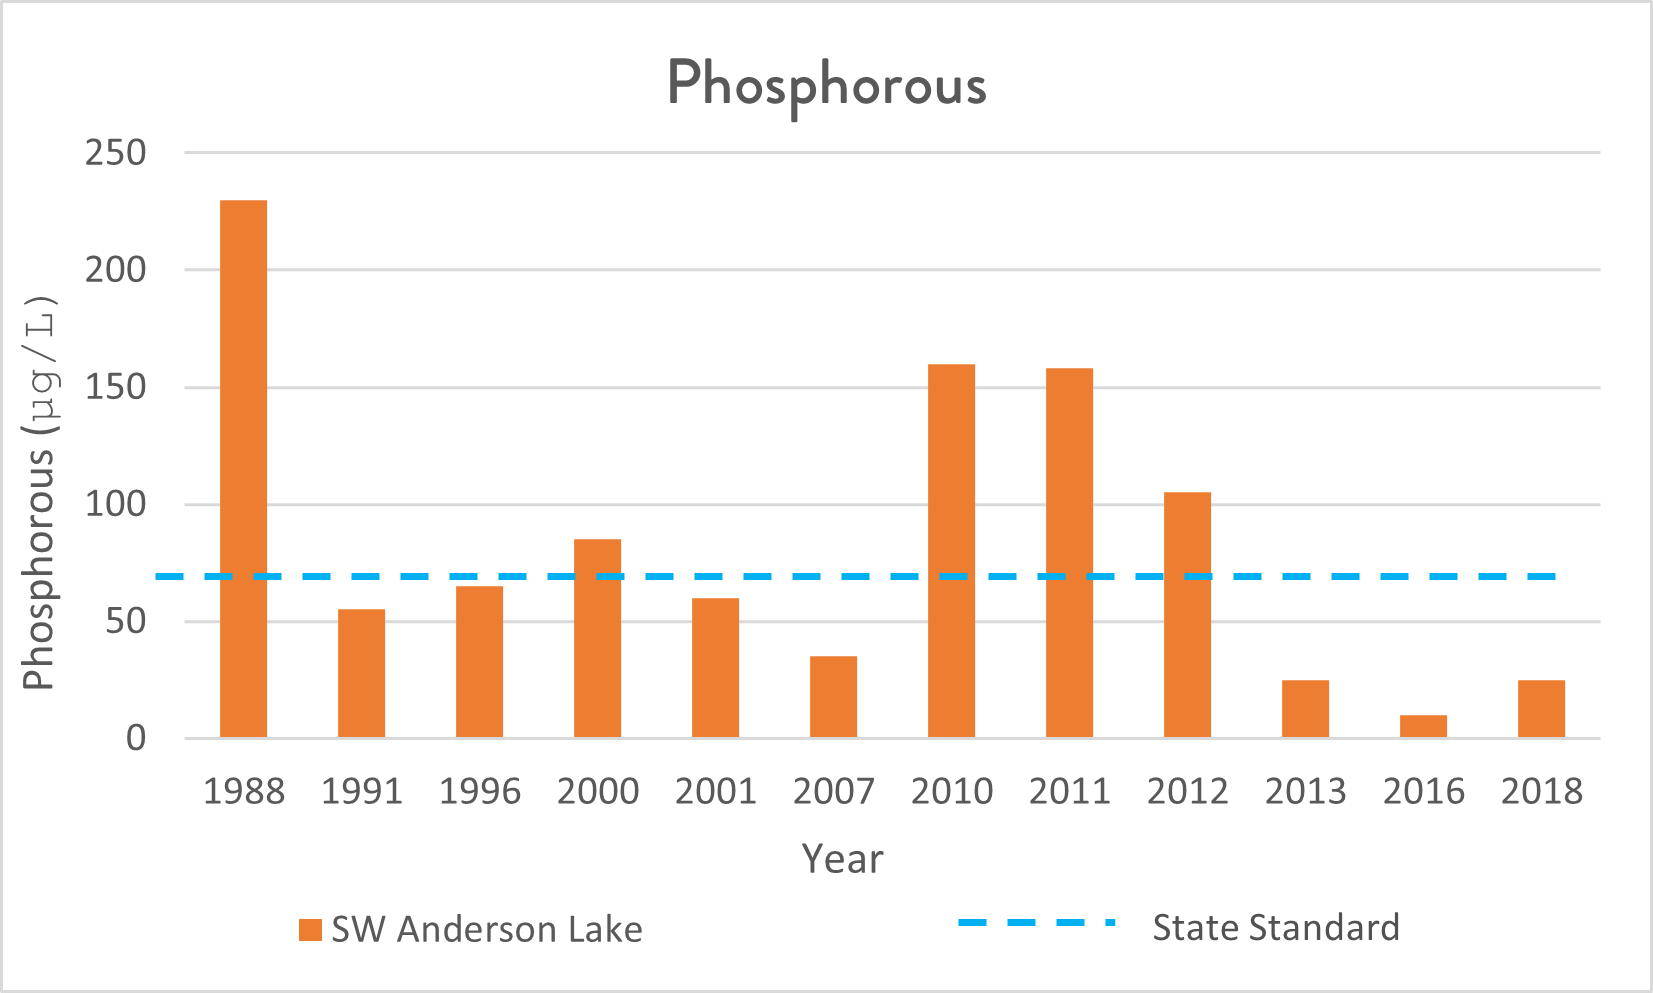 graph of phosphorous levels in SW Anderson Lake from 1988 to 2018